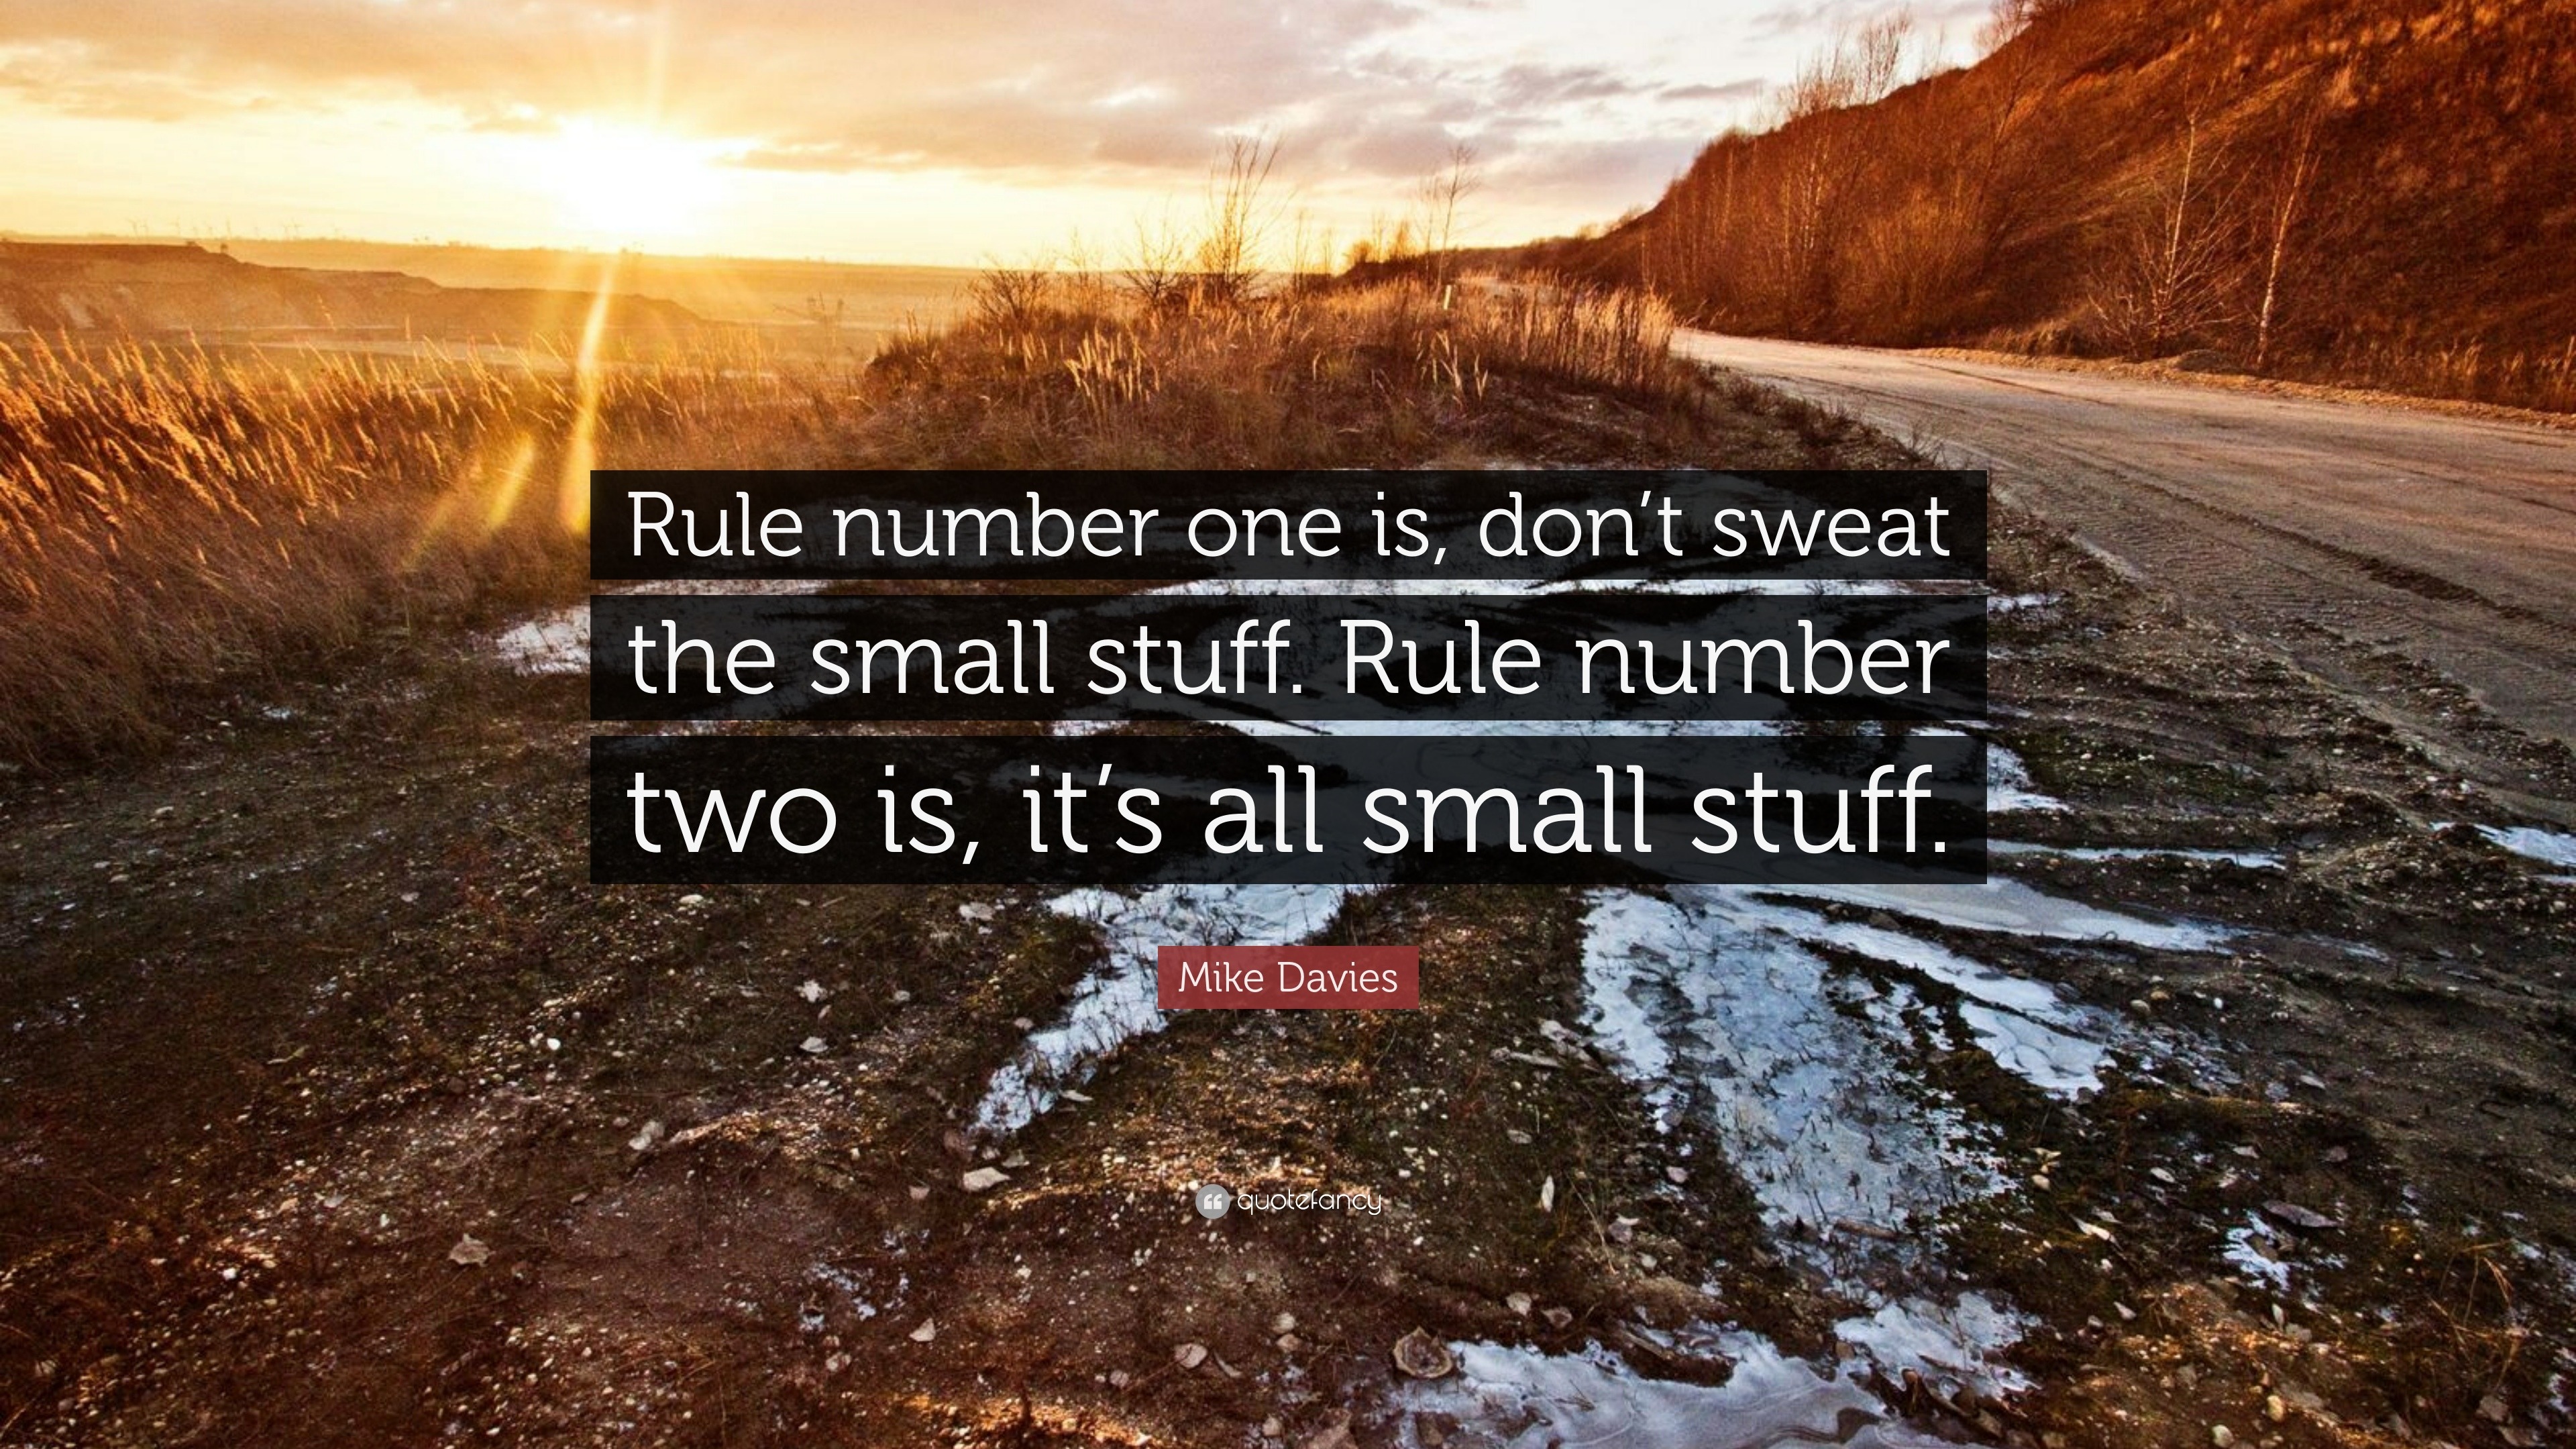 Mike Davies Quote “Rule number one is don t sweat the small